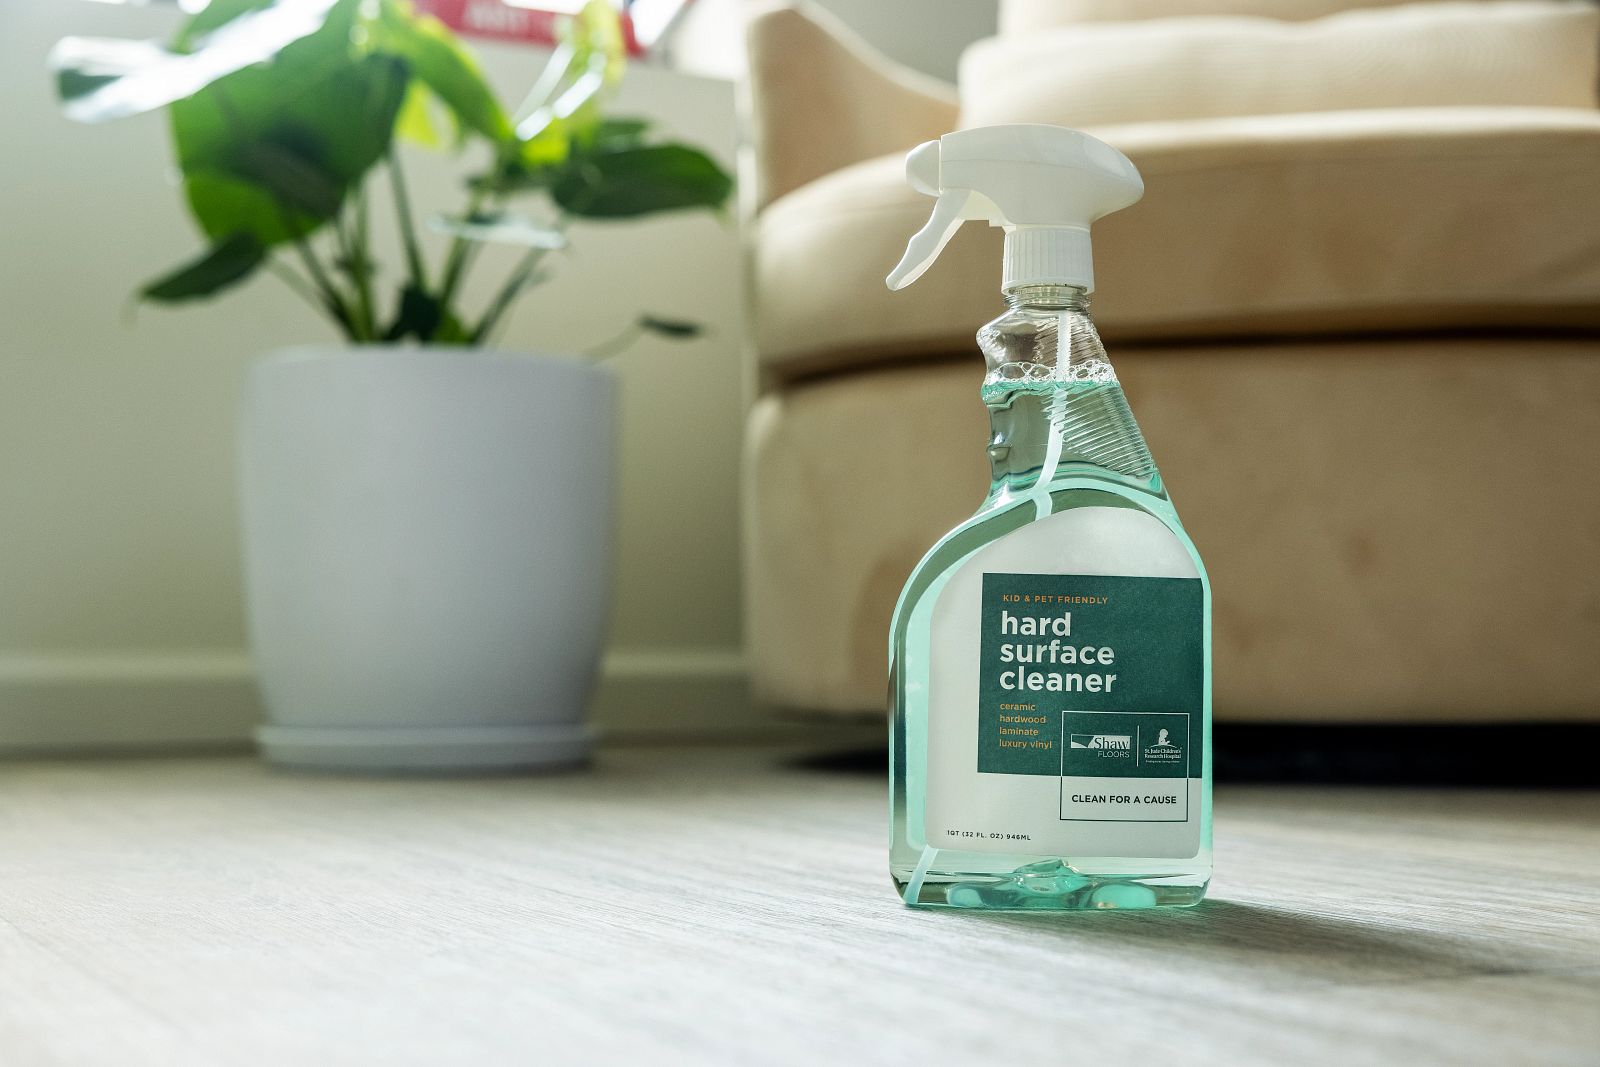 Shaw Hard Surface Cleaner